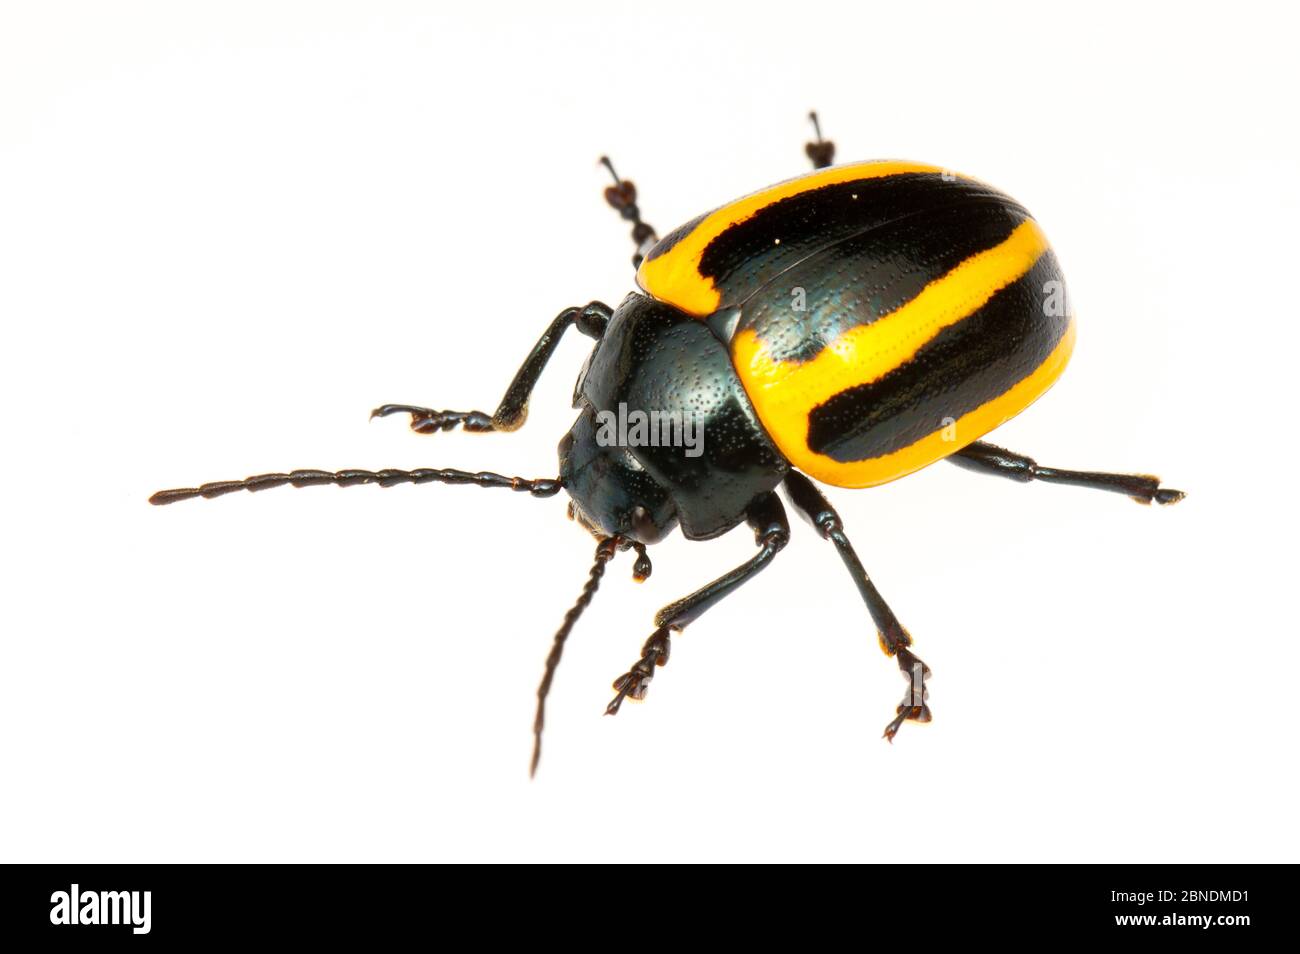 Leaf beetle (Chrysomelidae) Kaw Mountains, French Guiana. Meetyourneighbours.net project Stock Photo